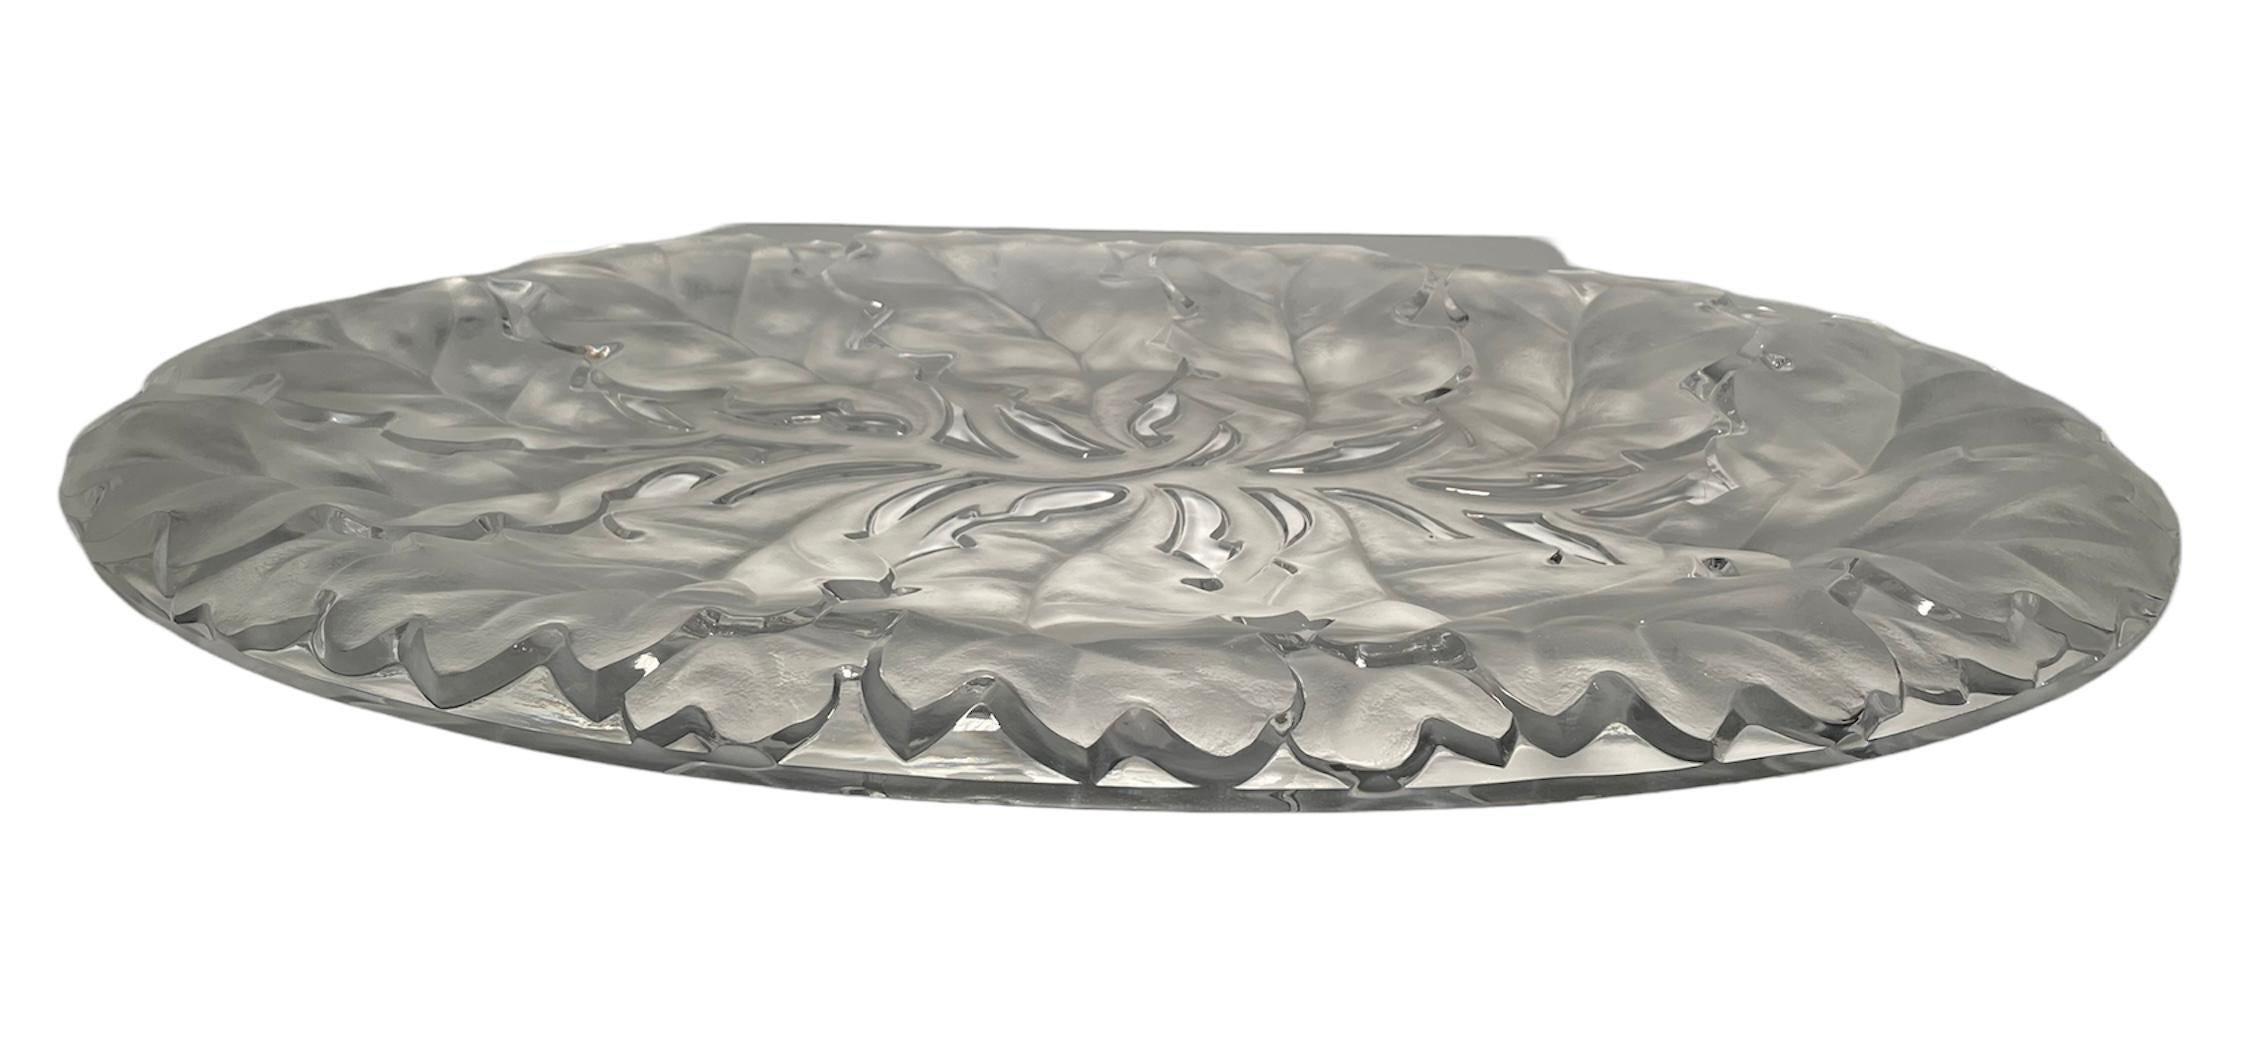 This is a Lalique crystal “Chene” oak leaves platter. It depicts a clear and frosted large oval heavy crystal tray/plate with a relief of a long branch full of big oak leaves. Below the base, it is hallmarked Lalique encircled R,France.